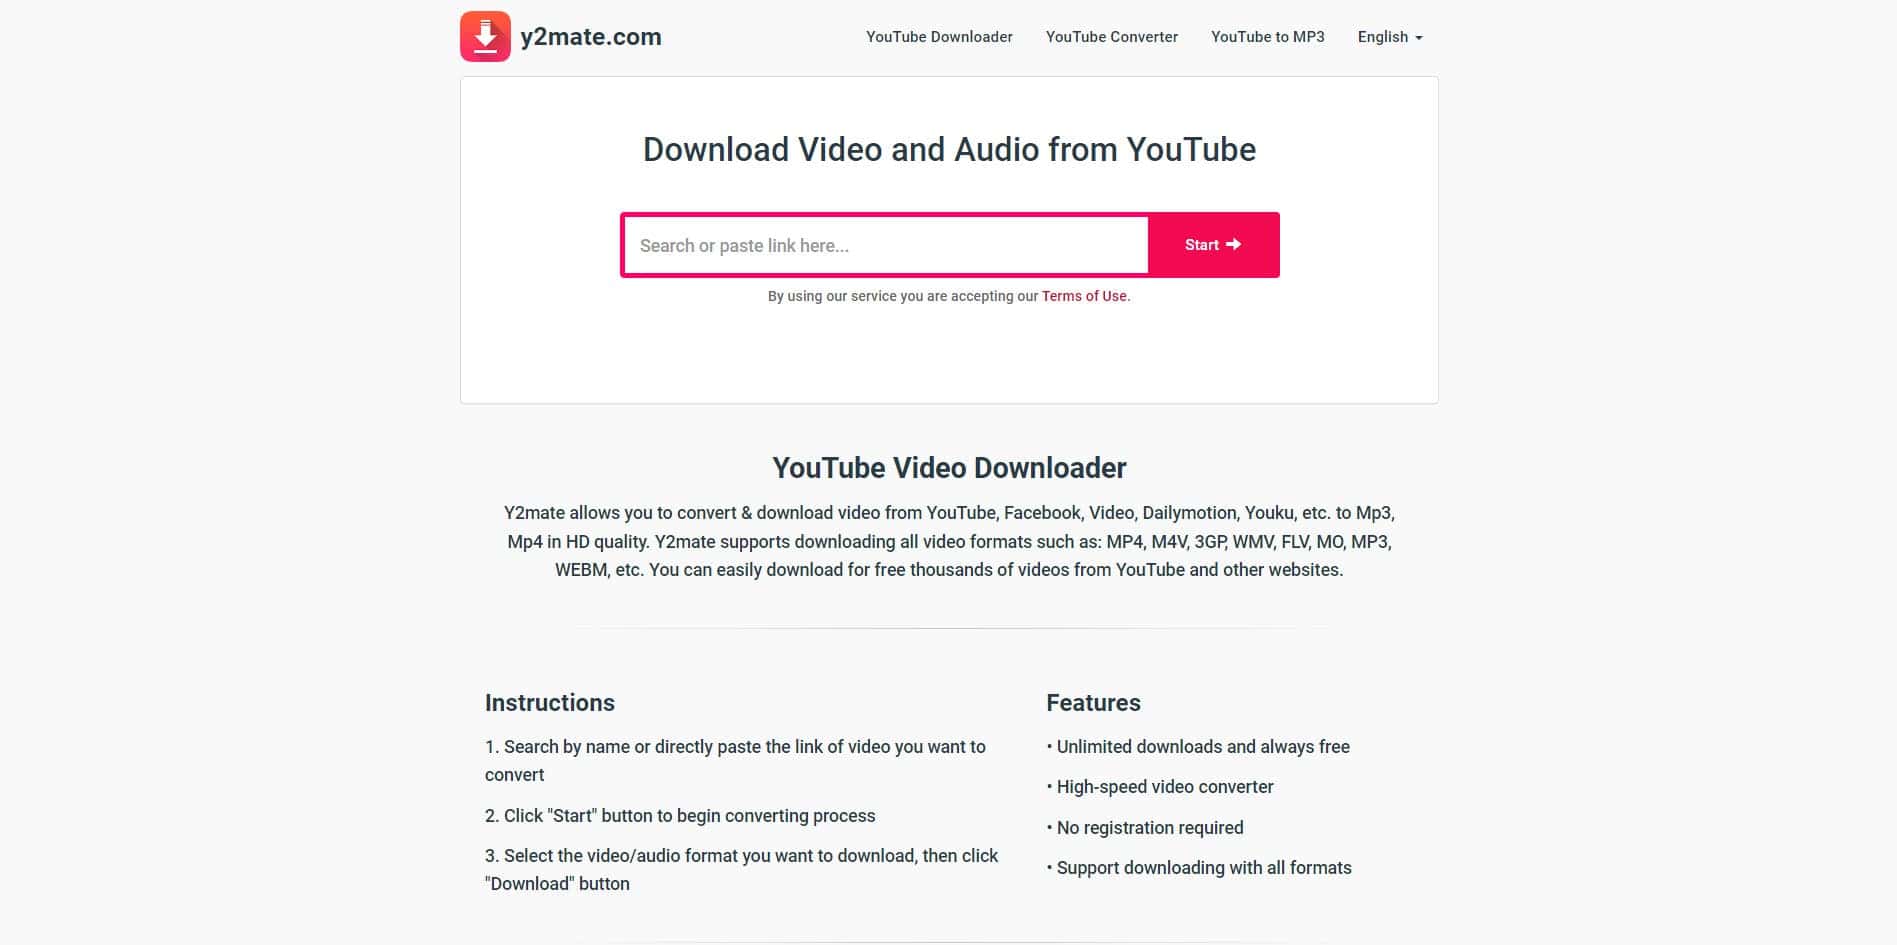 y2Mate video downloads